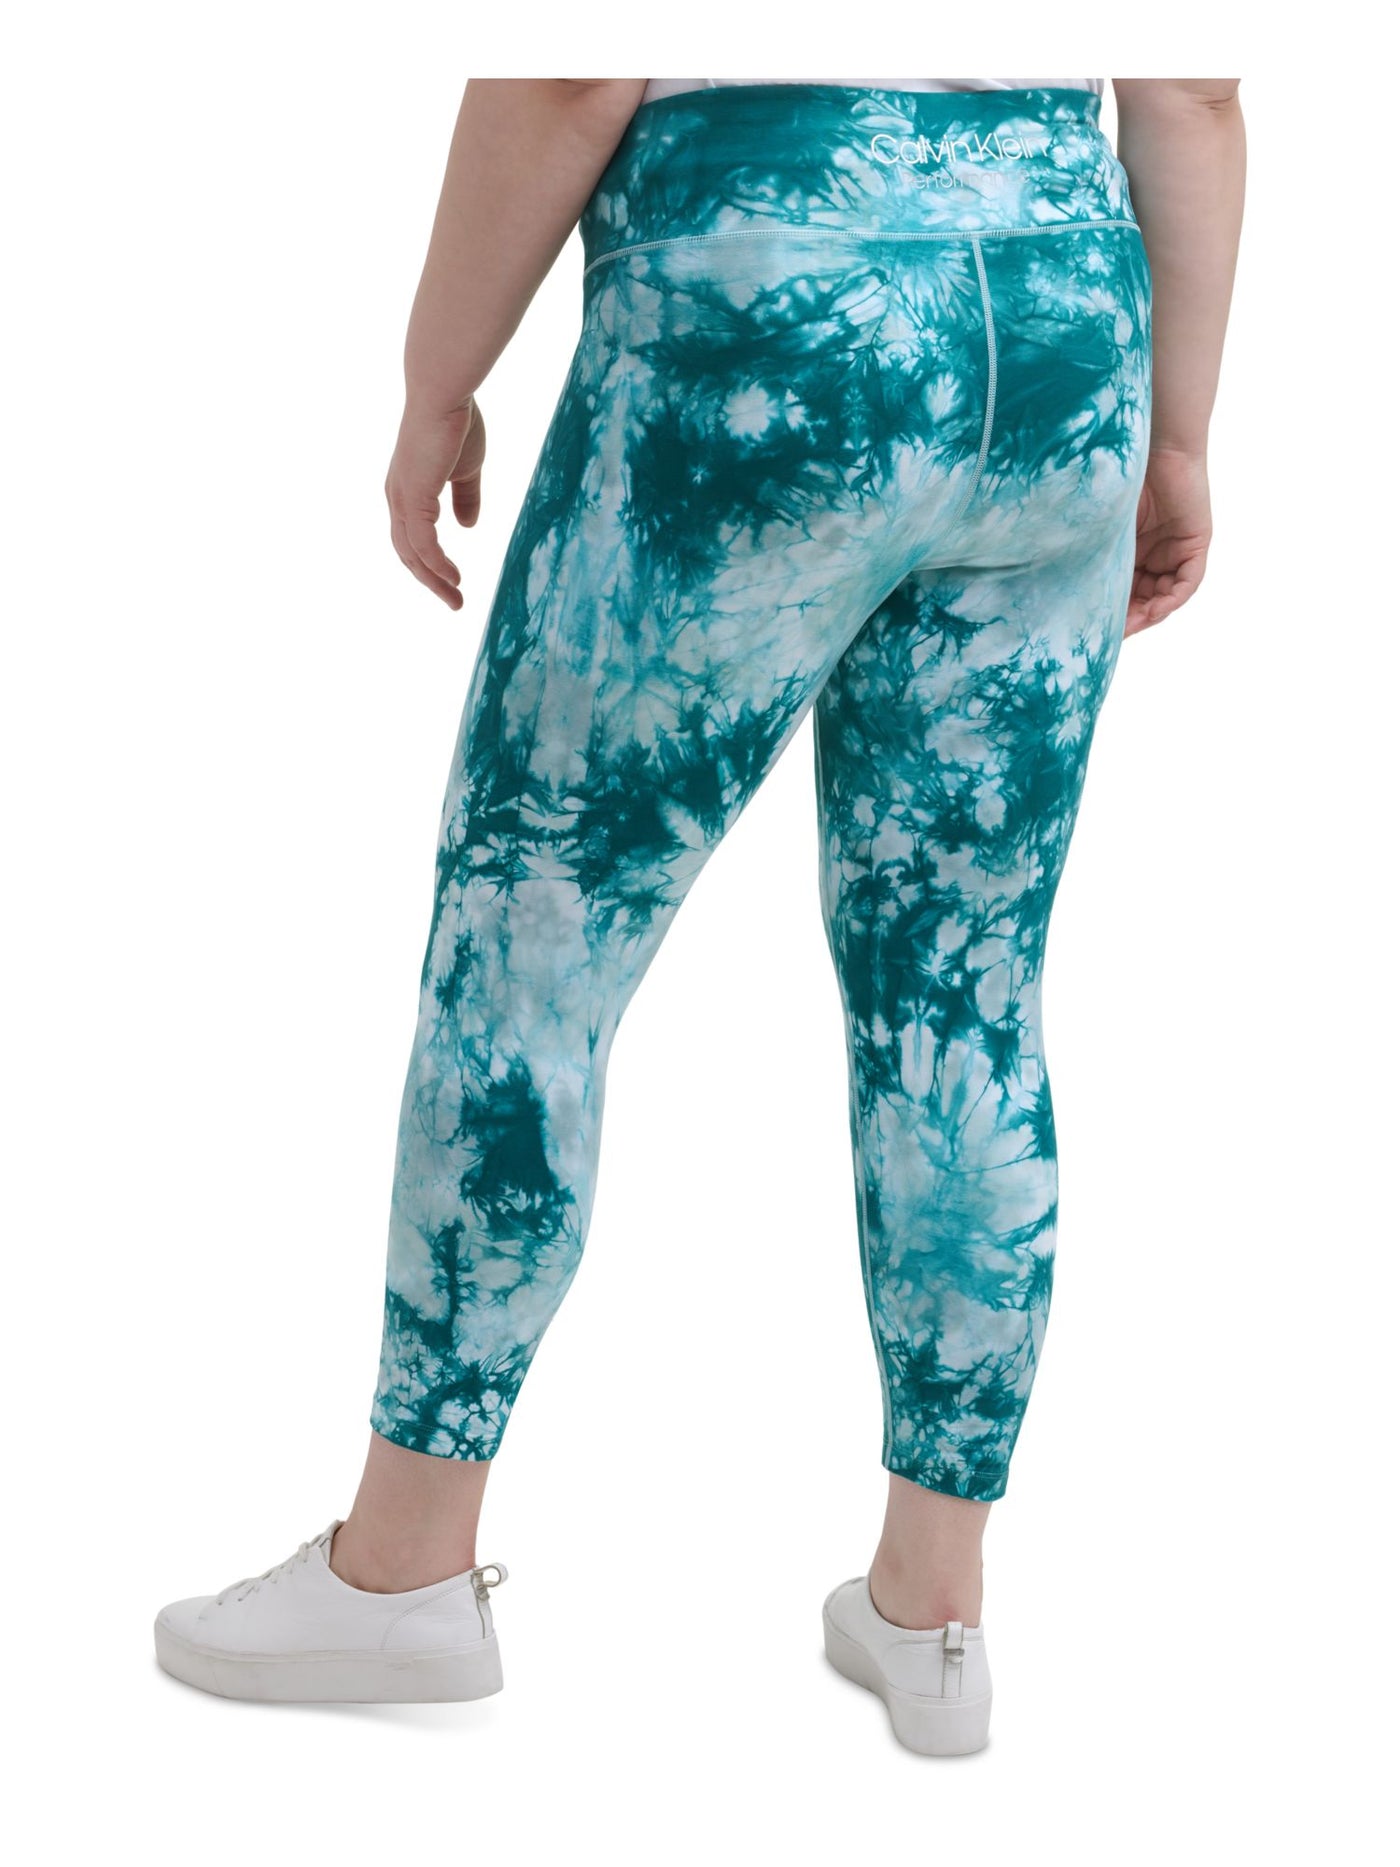 CALVIN KLEIN PERFORMANCE Womens Turquoise Stretch Pocketed Pull-on Style Tie Dye Active Wear Skinny Leggings Plus 3X